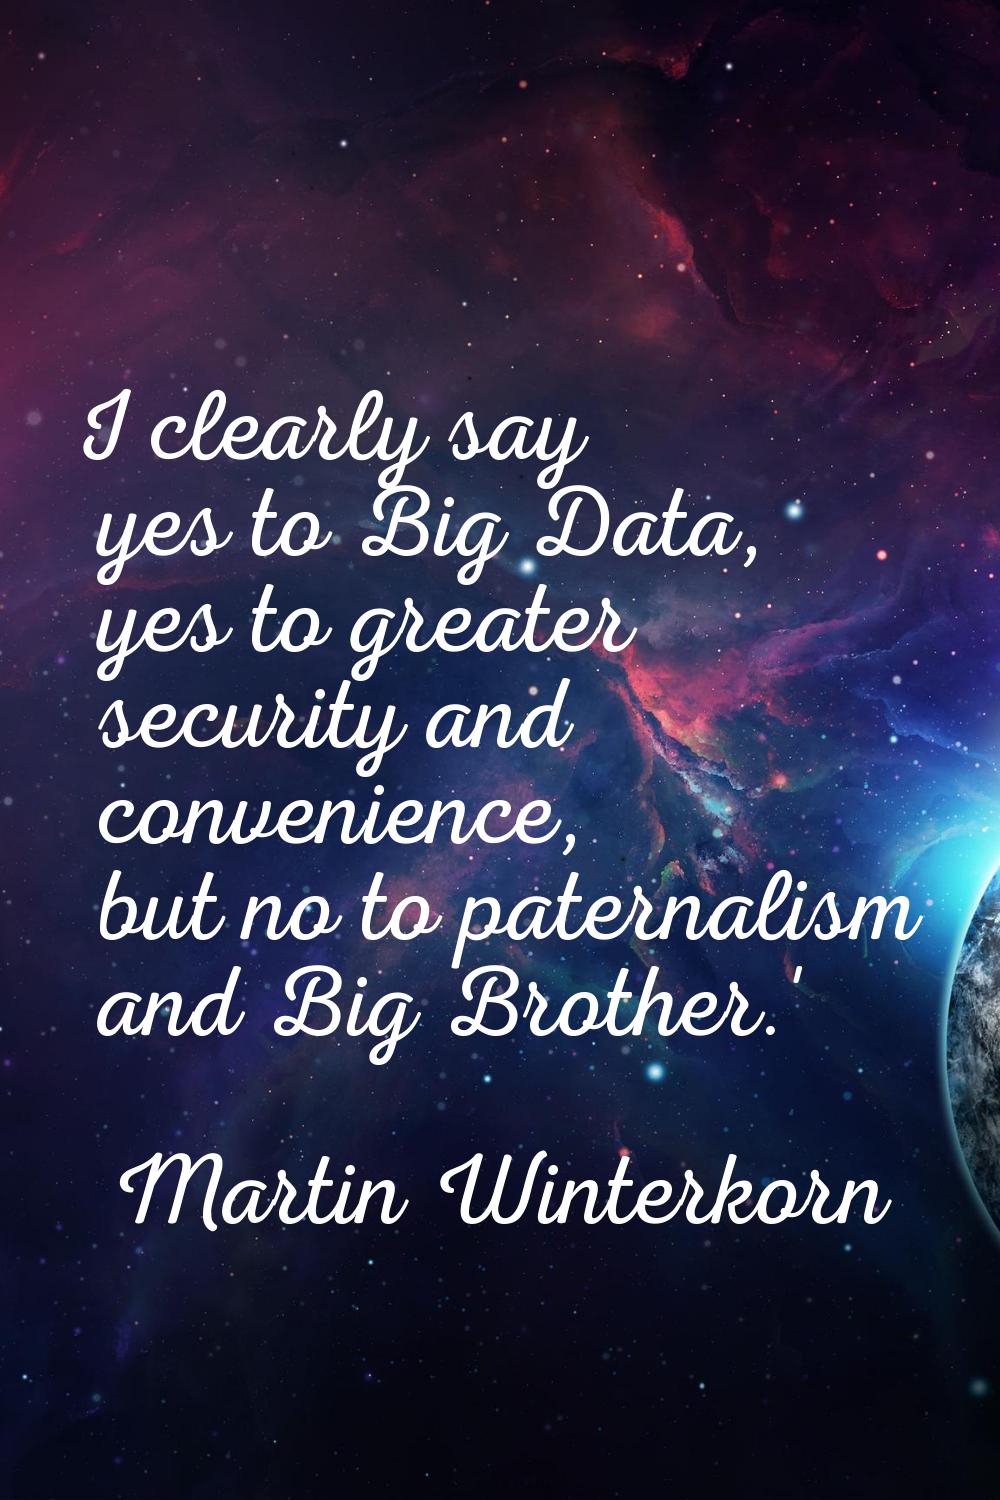 I clearly say yes to Big Data, yes to greater security and convenience, but no to paternalism and B